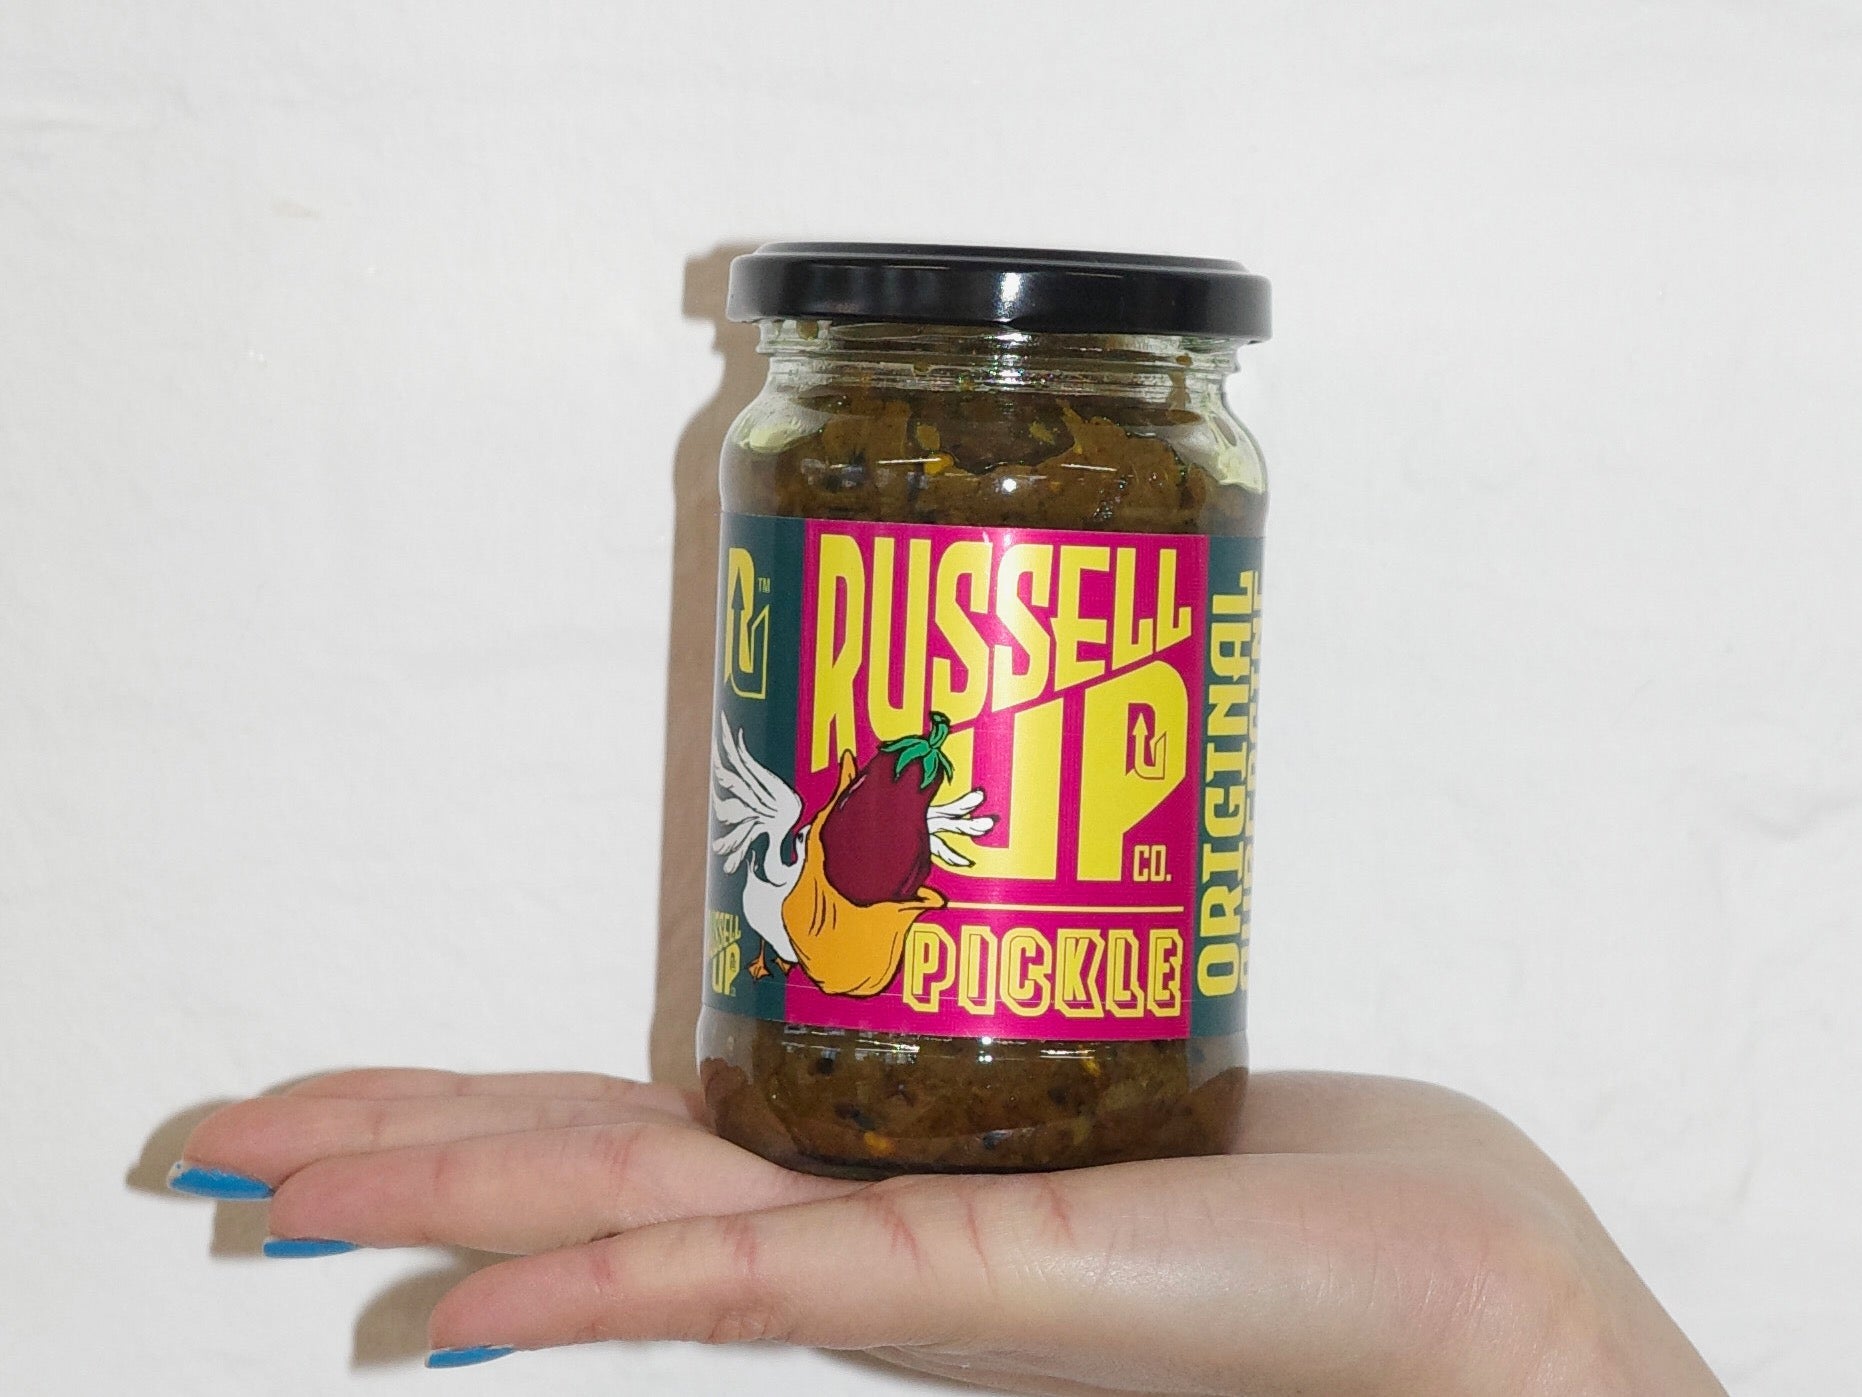 Russell Up Pickle co